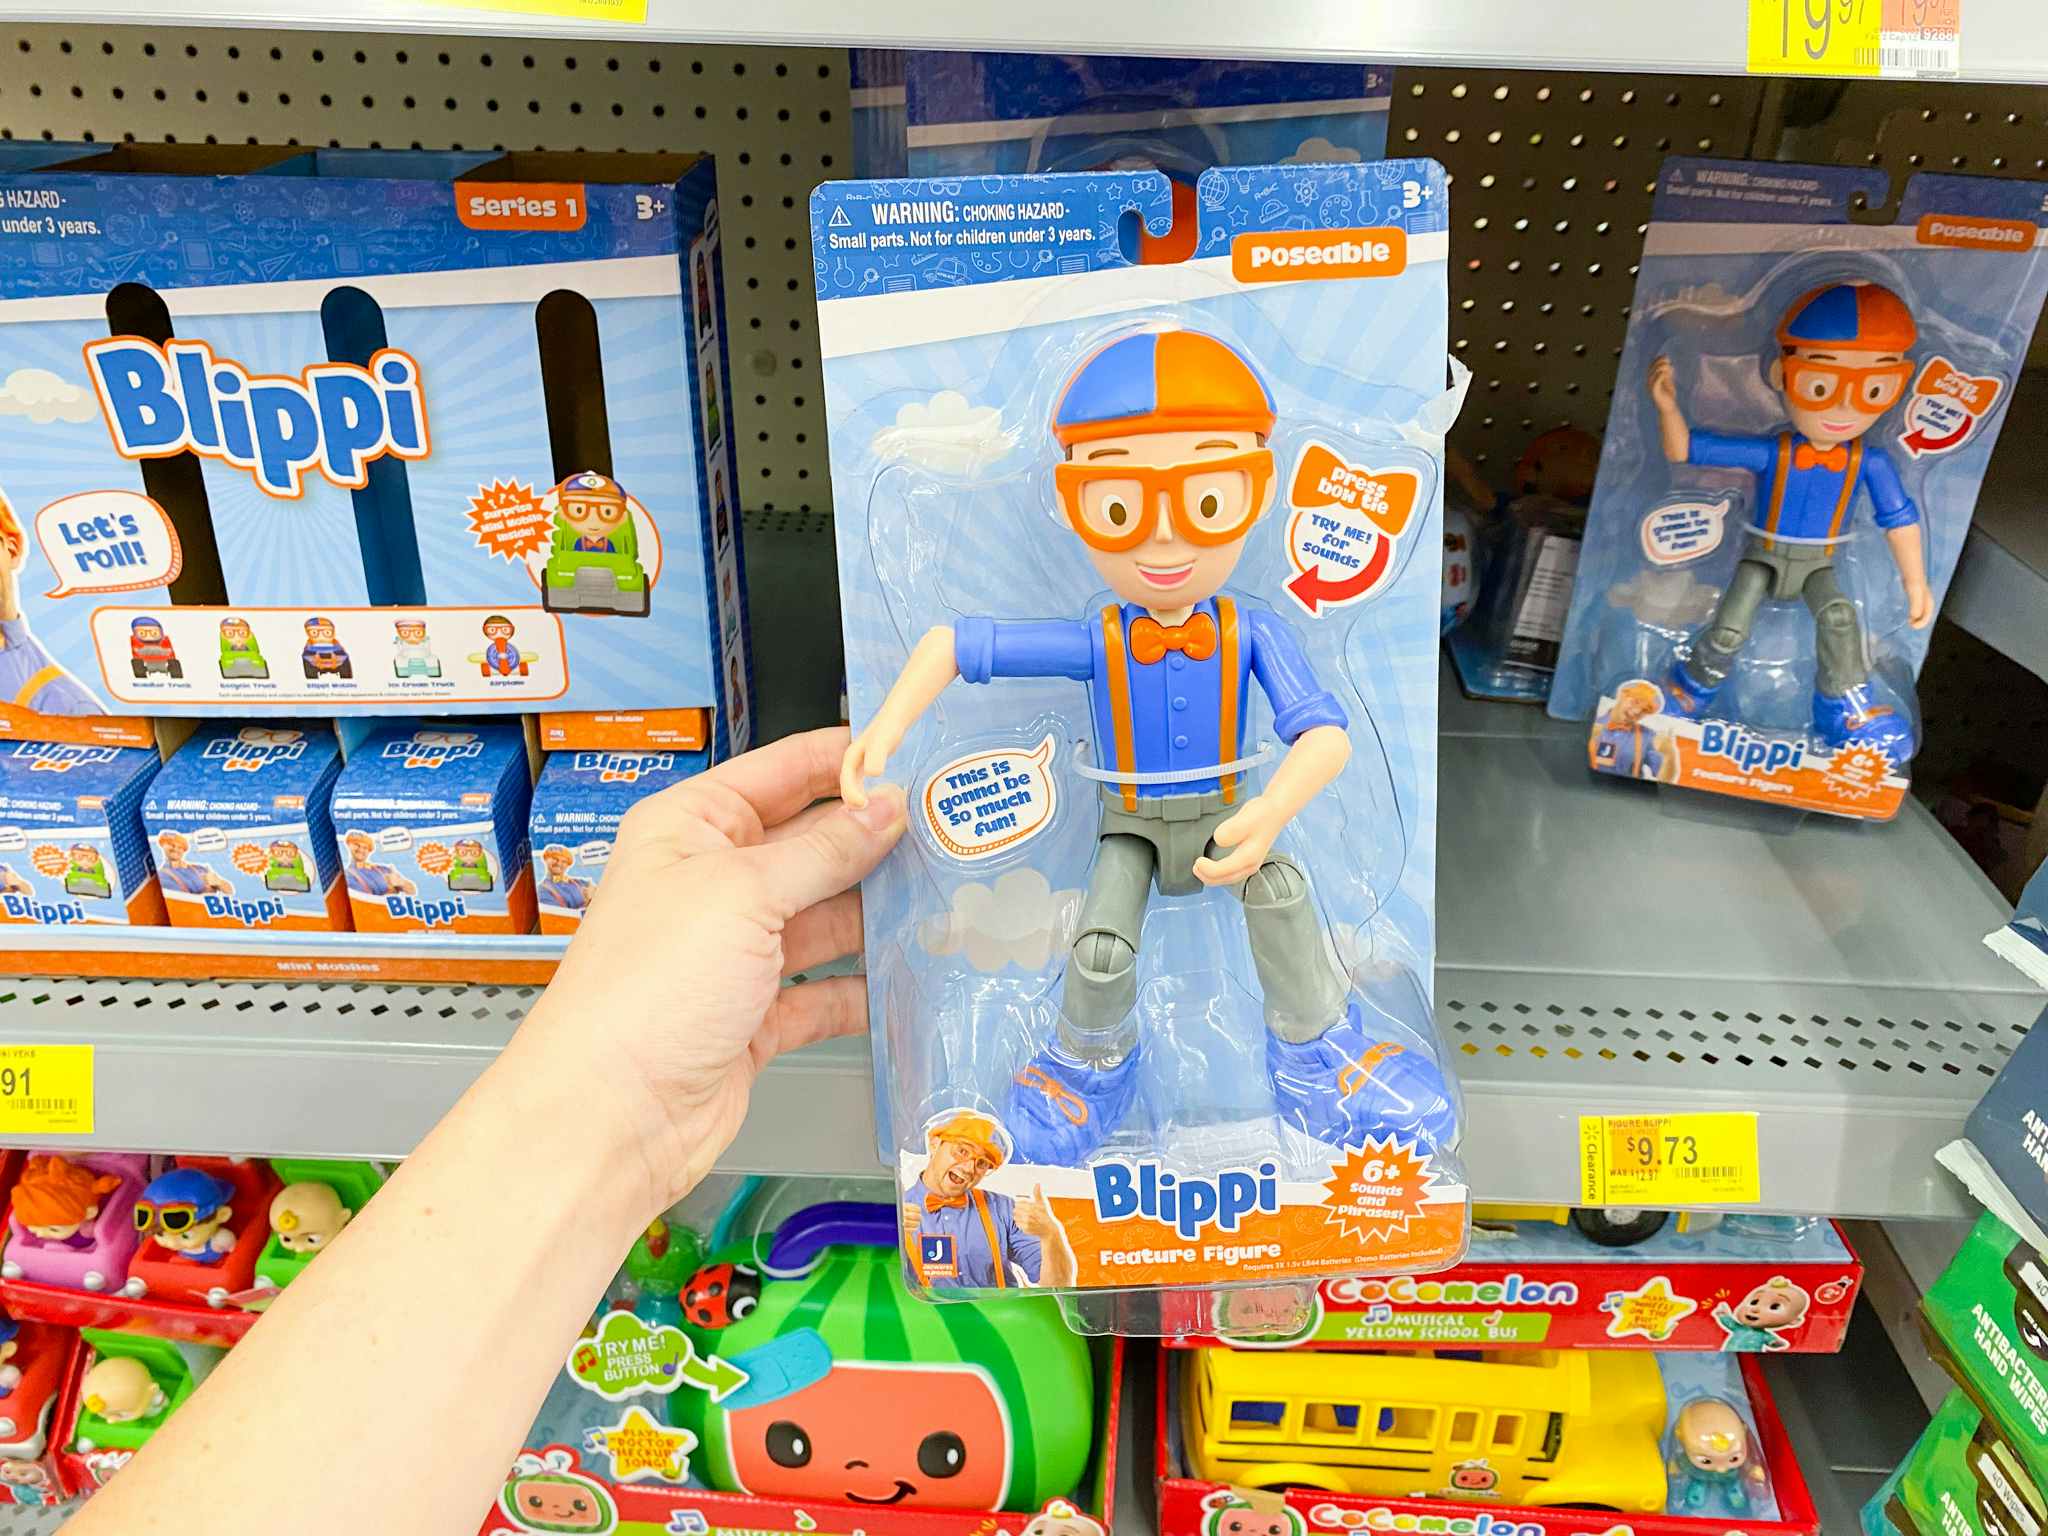 blippi feature figure toy with walmart clearance tag